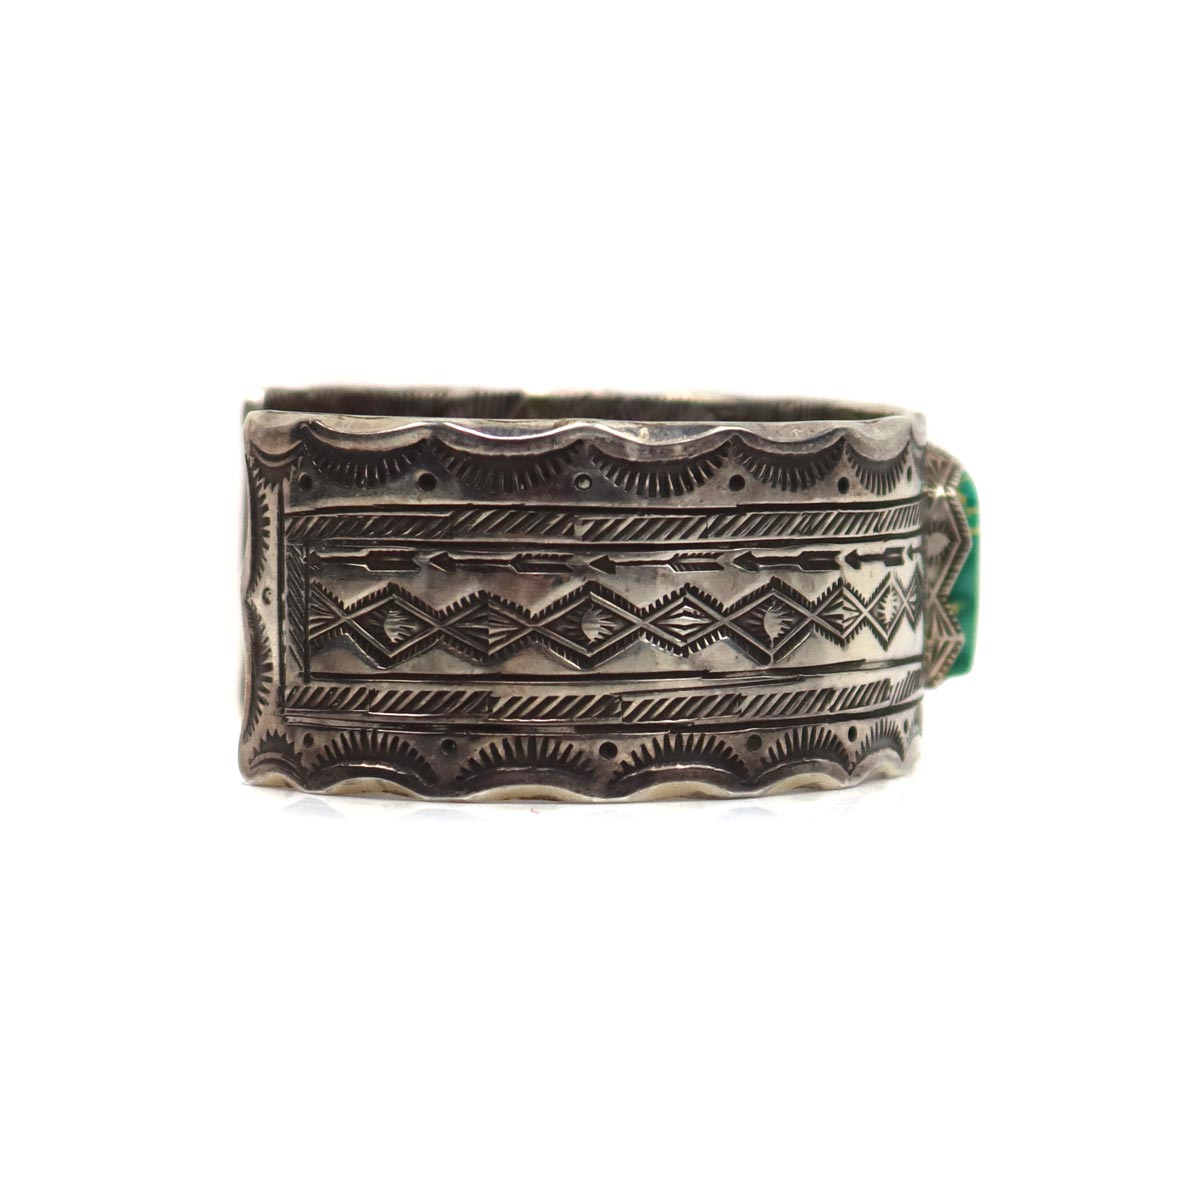 Carl and Irene Clark - Navajo Turquoise and Silver Bracelet with Stamped Design c. 1990-2000s, size 7 (J15240-CO-015) 1